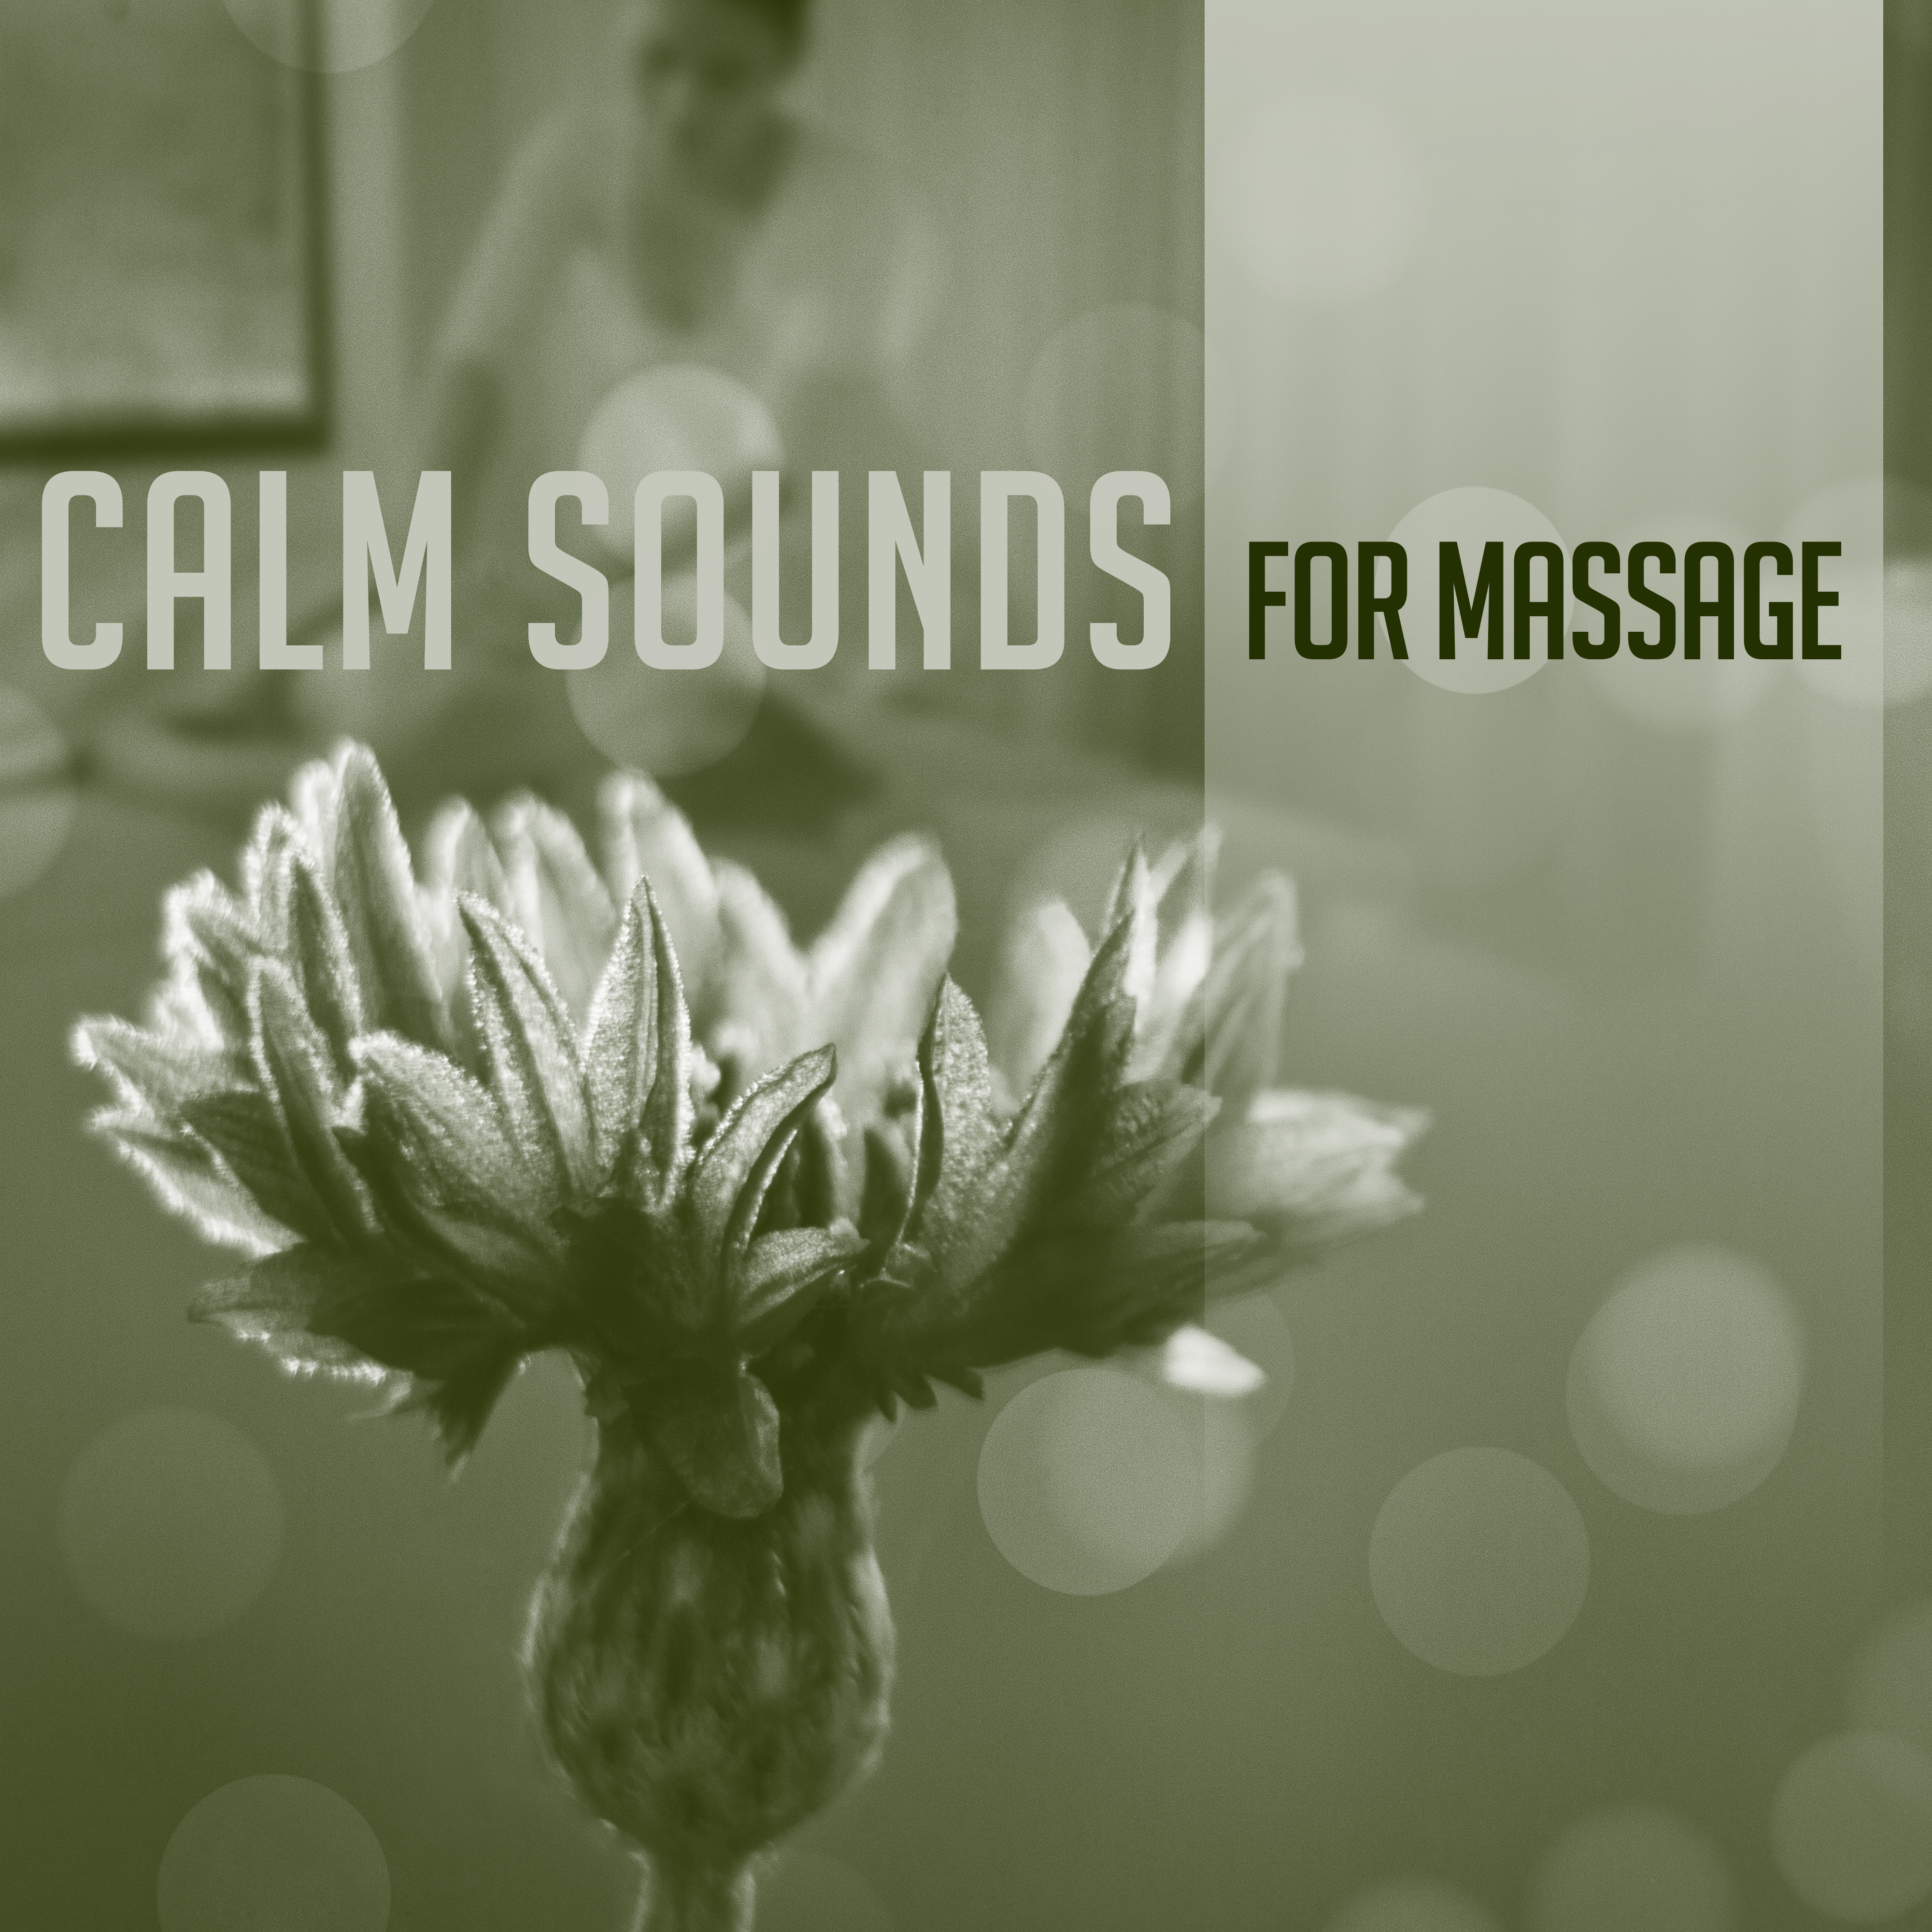 Calm Sounds for Massage – Relaxing New Age Music, Sounds for Rest, Hot Stone Massage, Spirit Journey